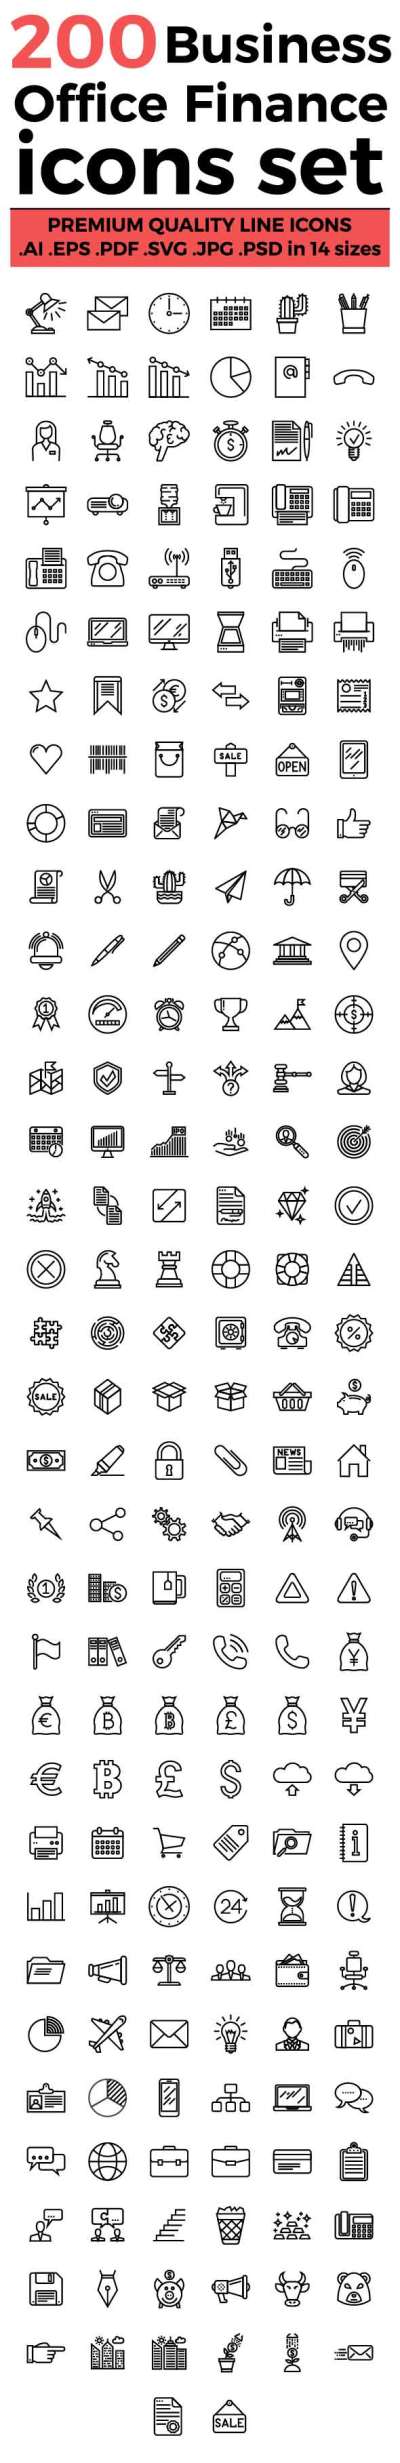 Business, office and finance icons set